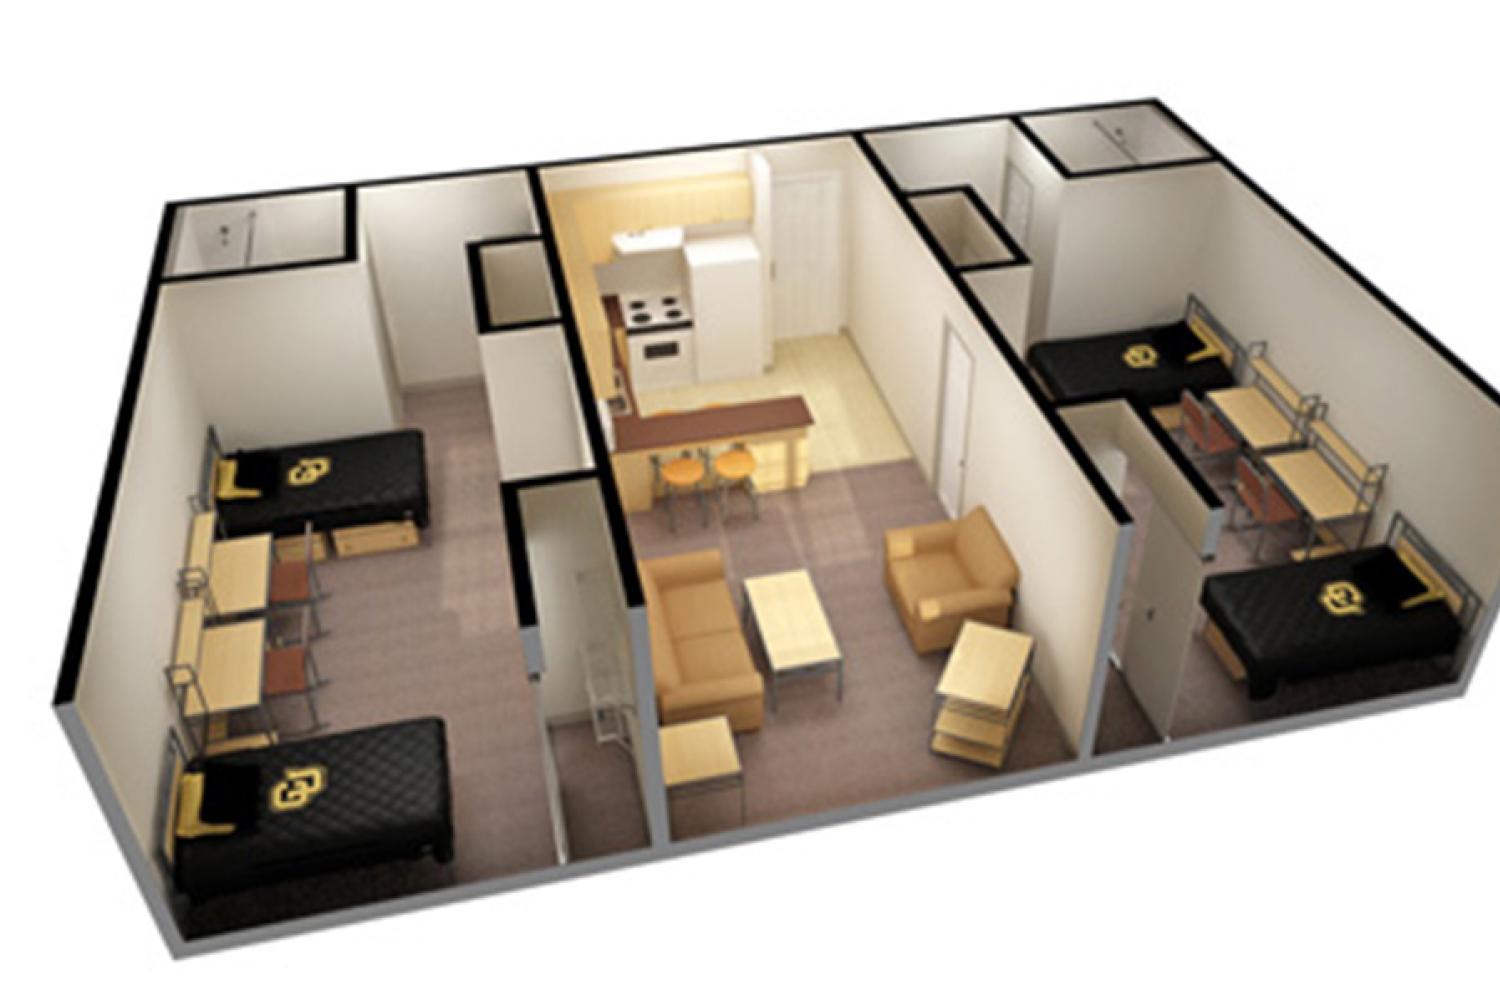 3D image with two double rooms, two bathrooms, living room, kitchen